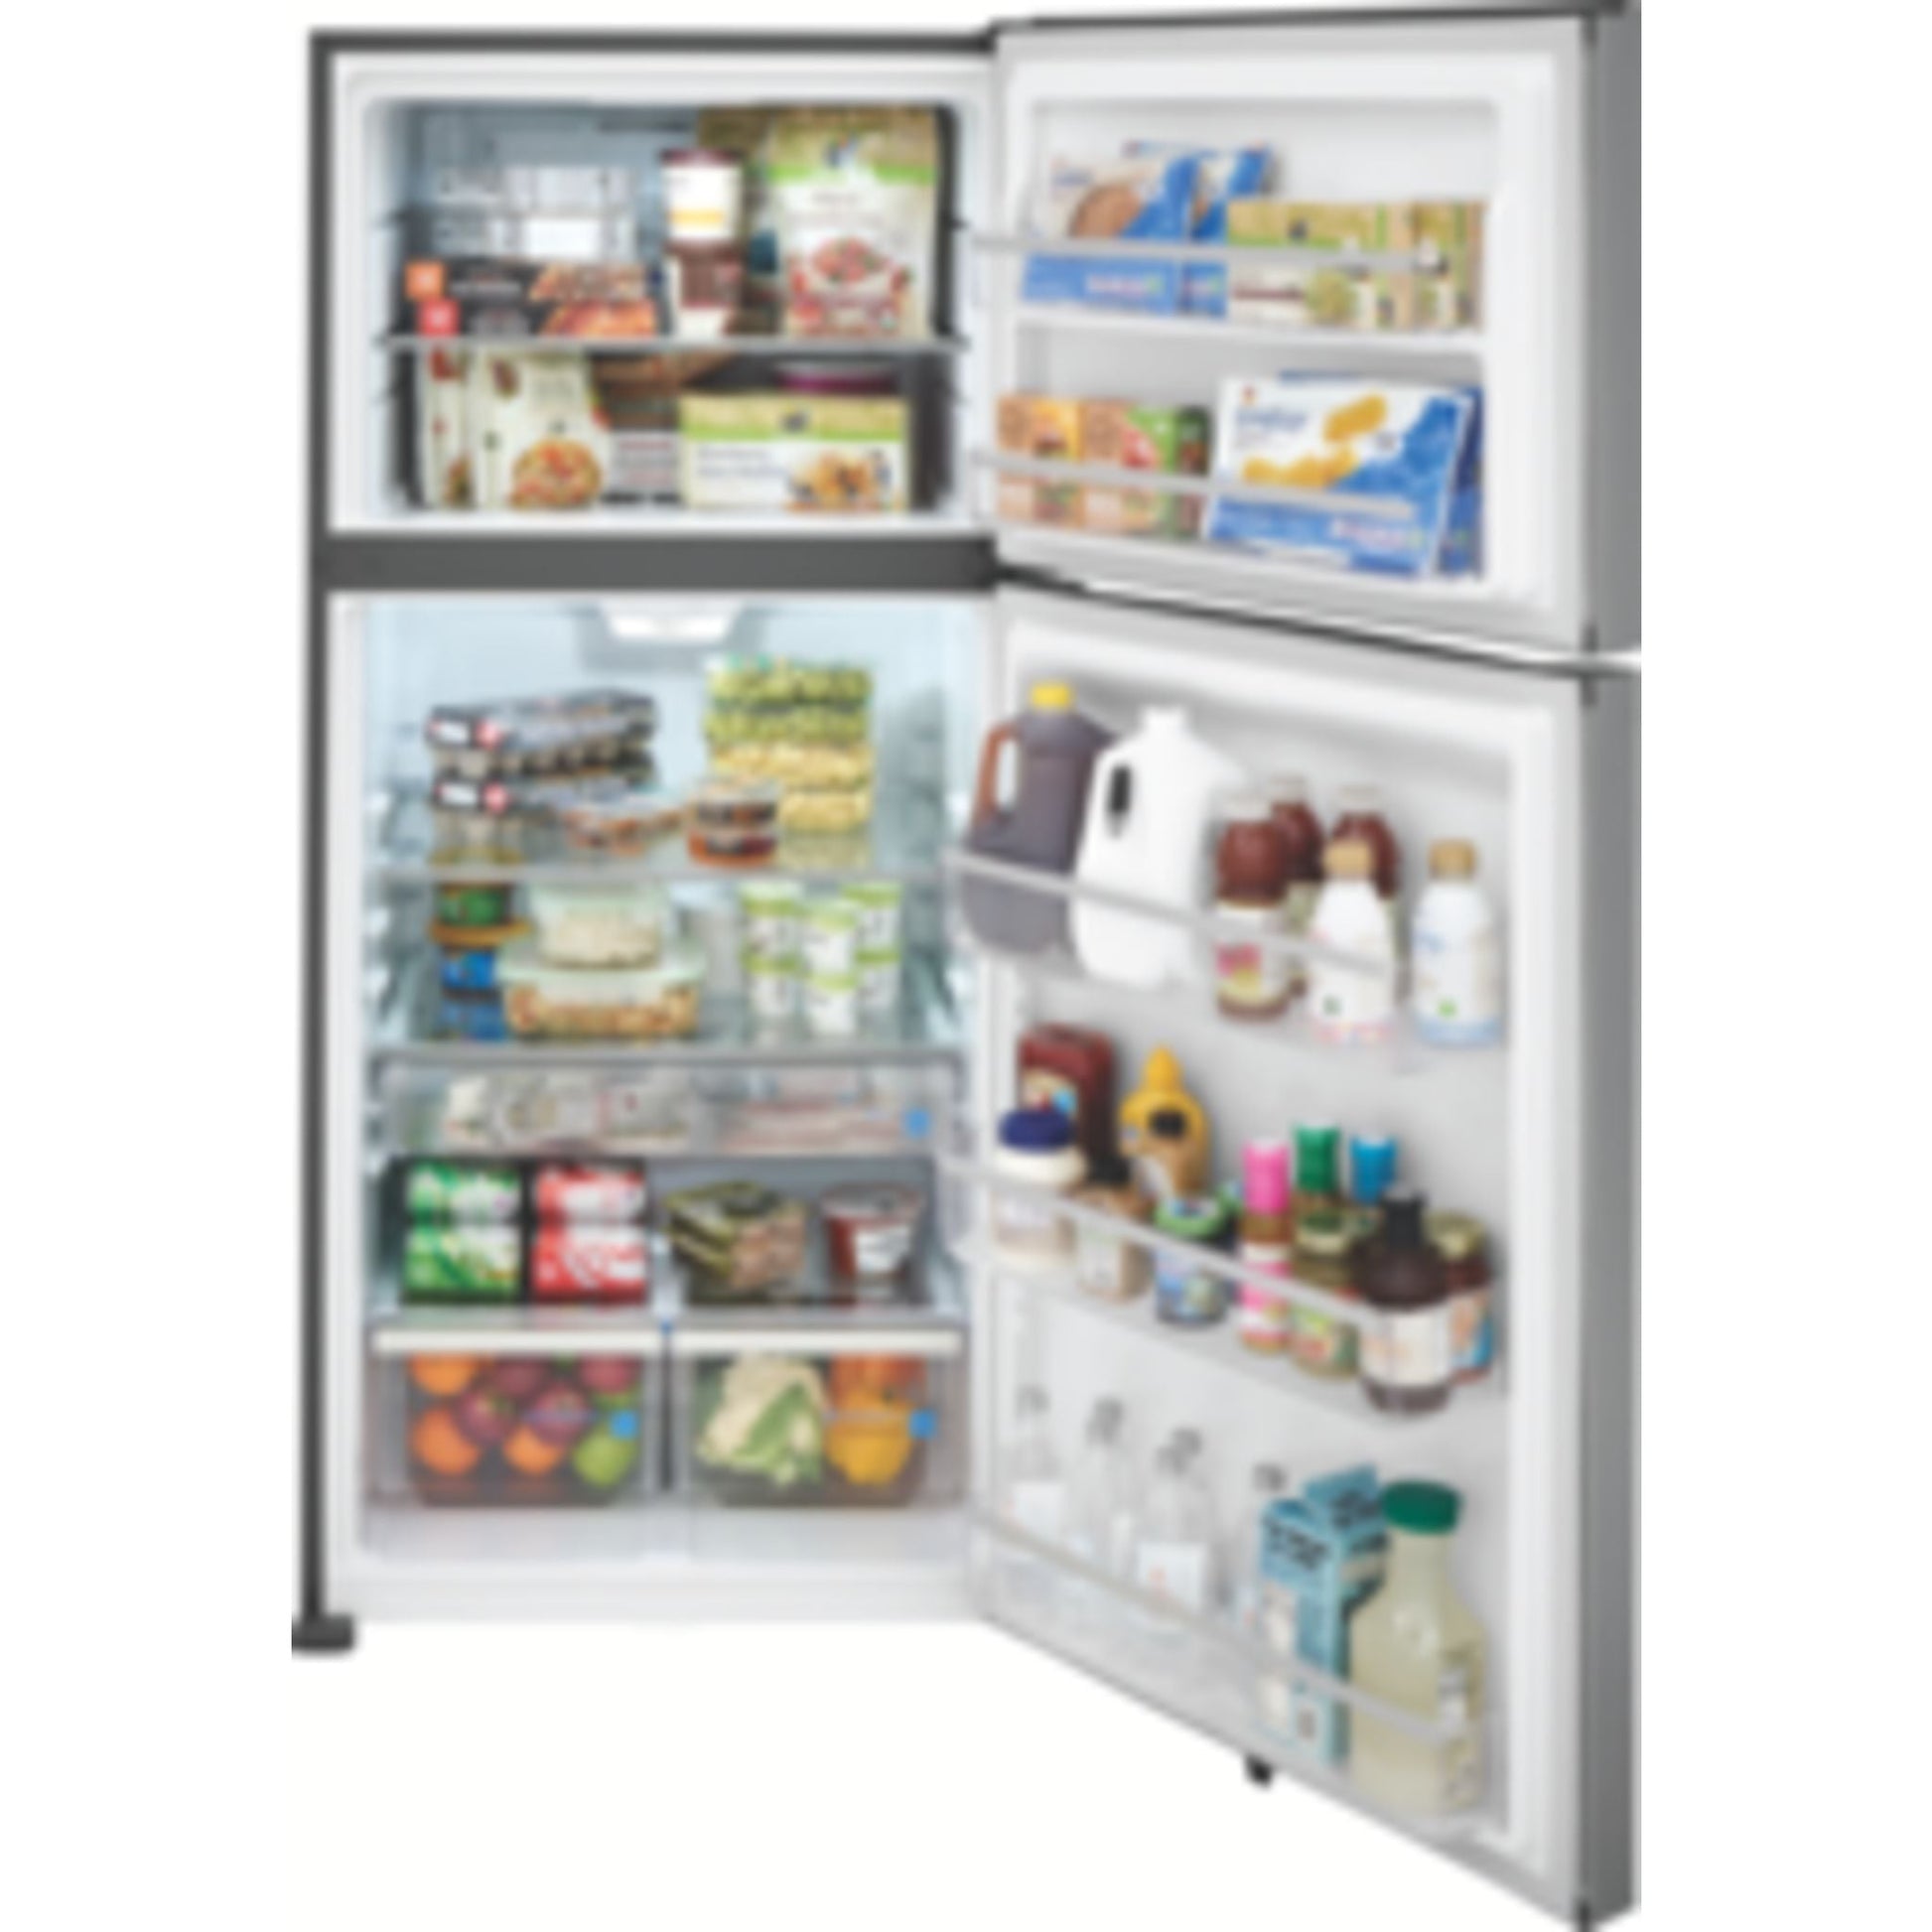 Frigidaire Gallery Top Mount Fridge (FGHT2055VF) - Stainless